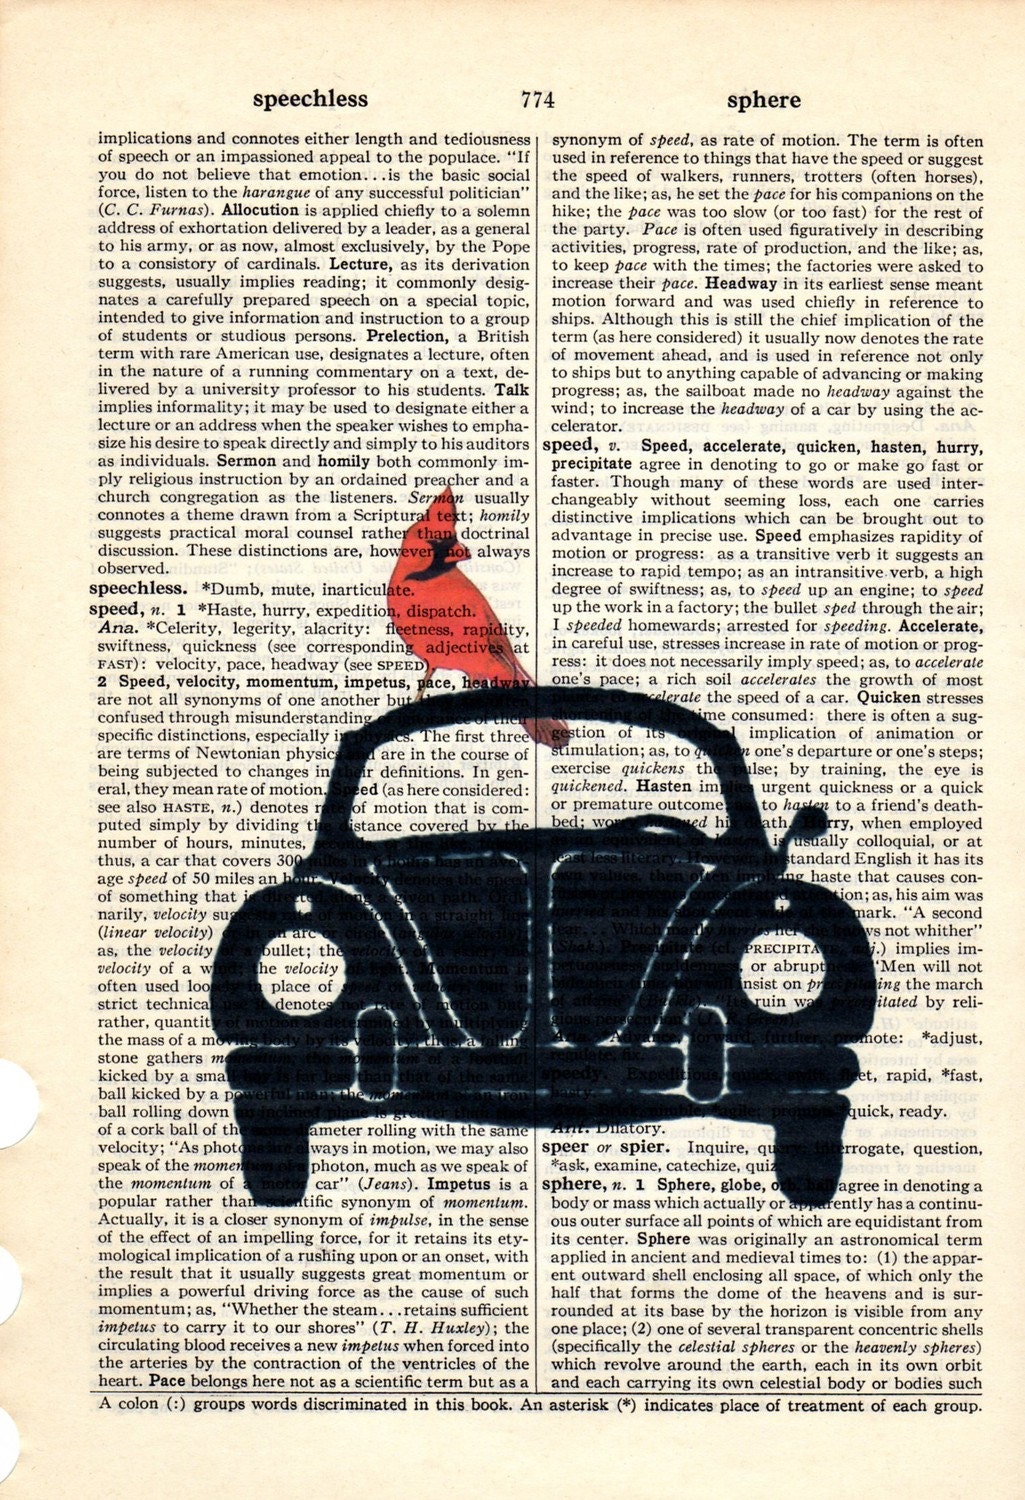 Ride a Bug VW Dictionary Book Page Collage